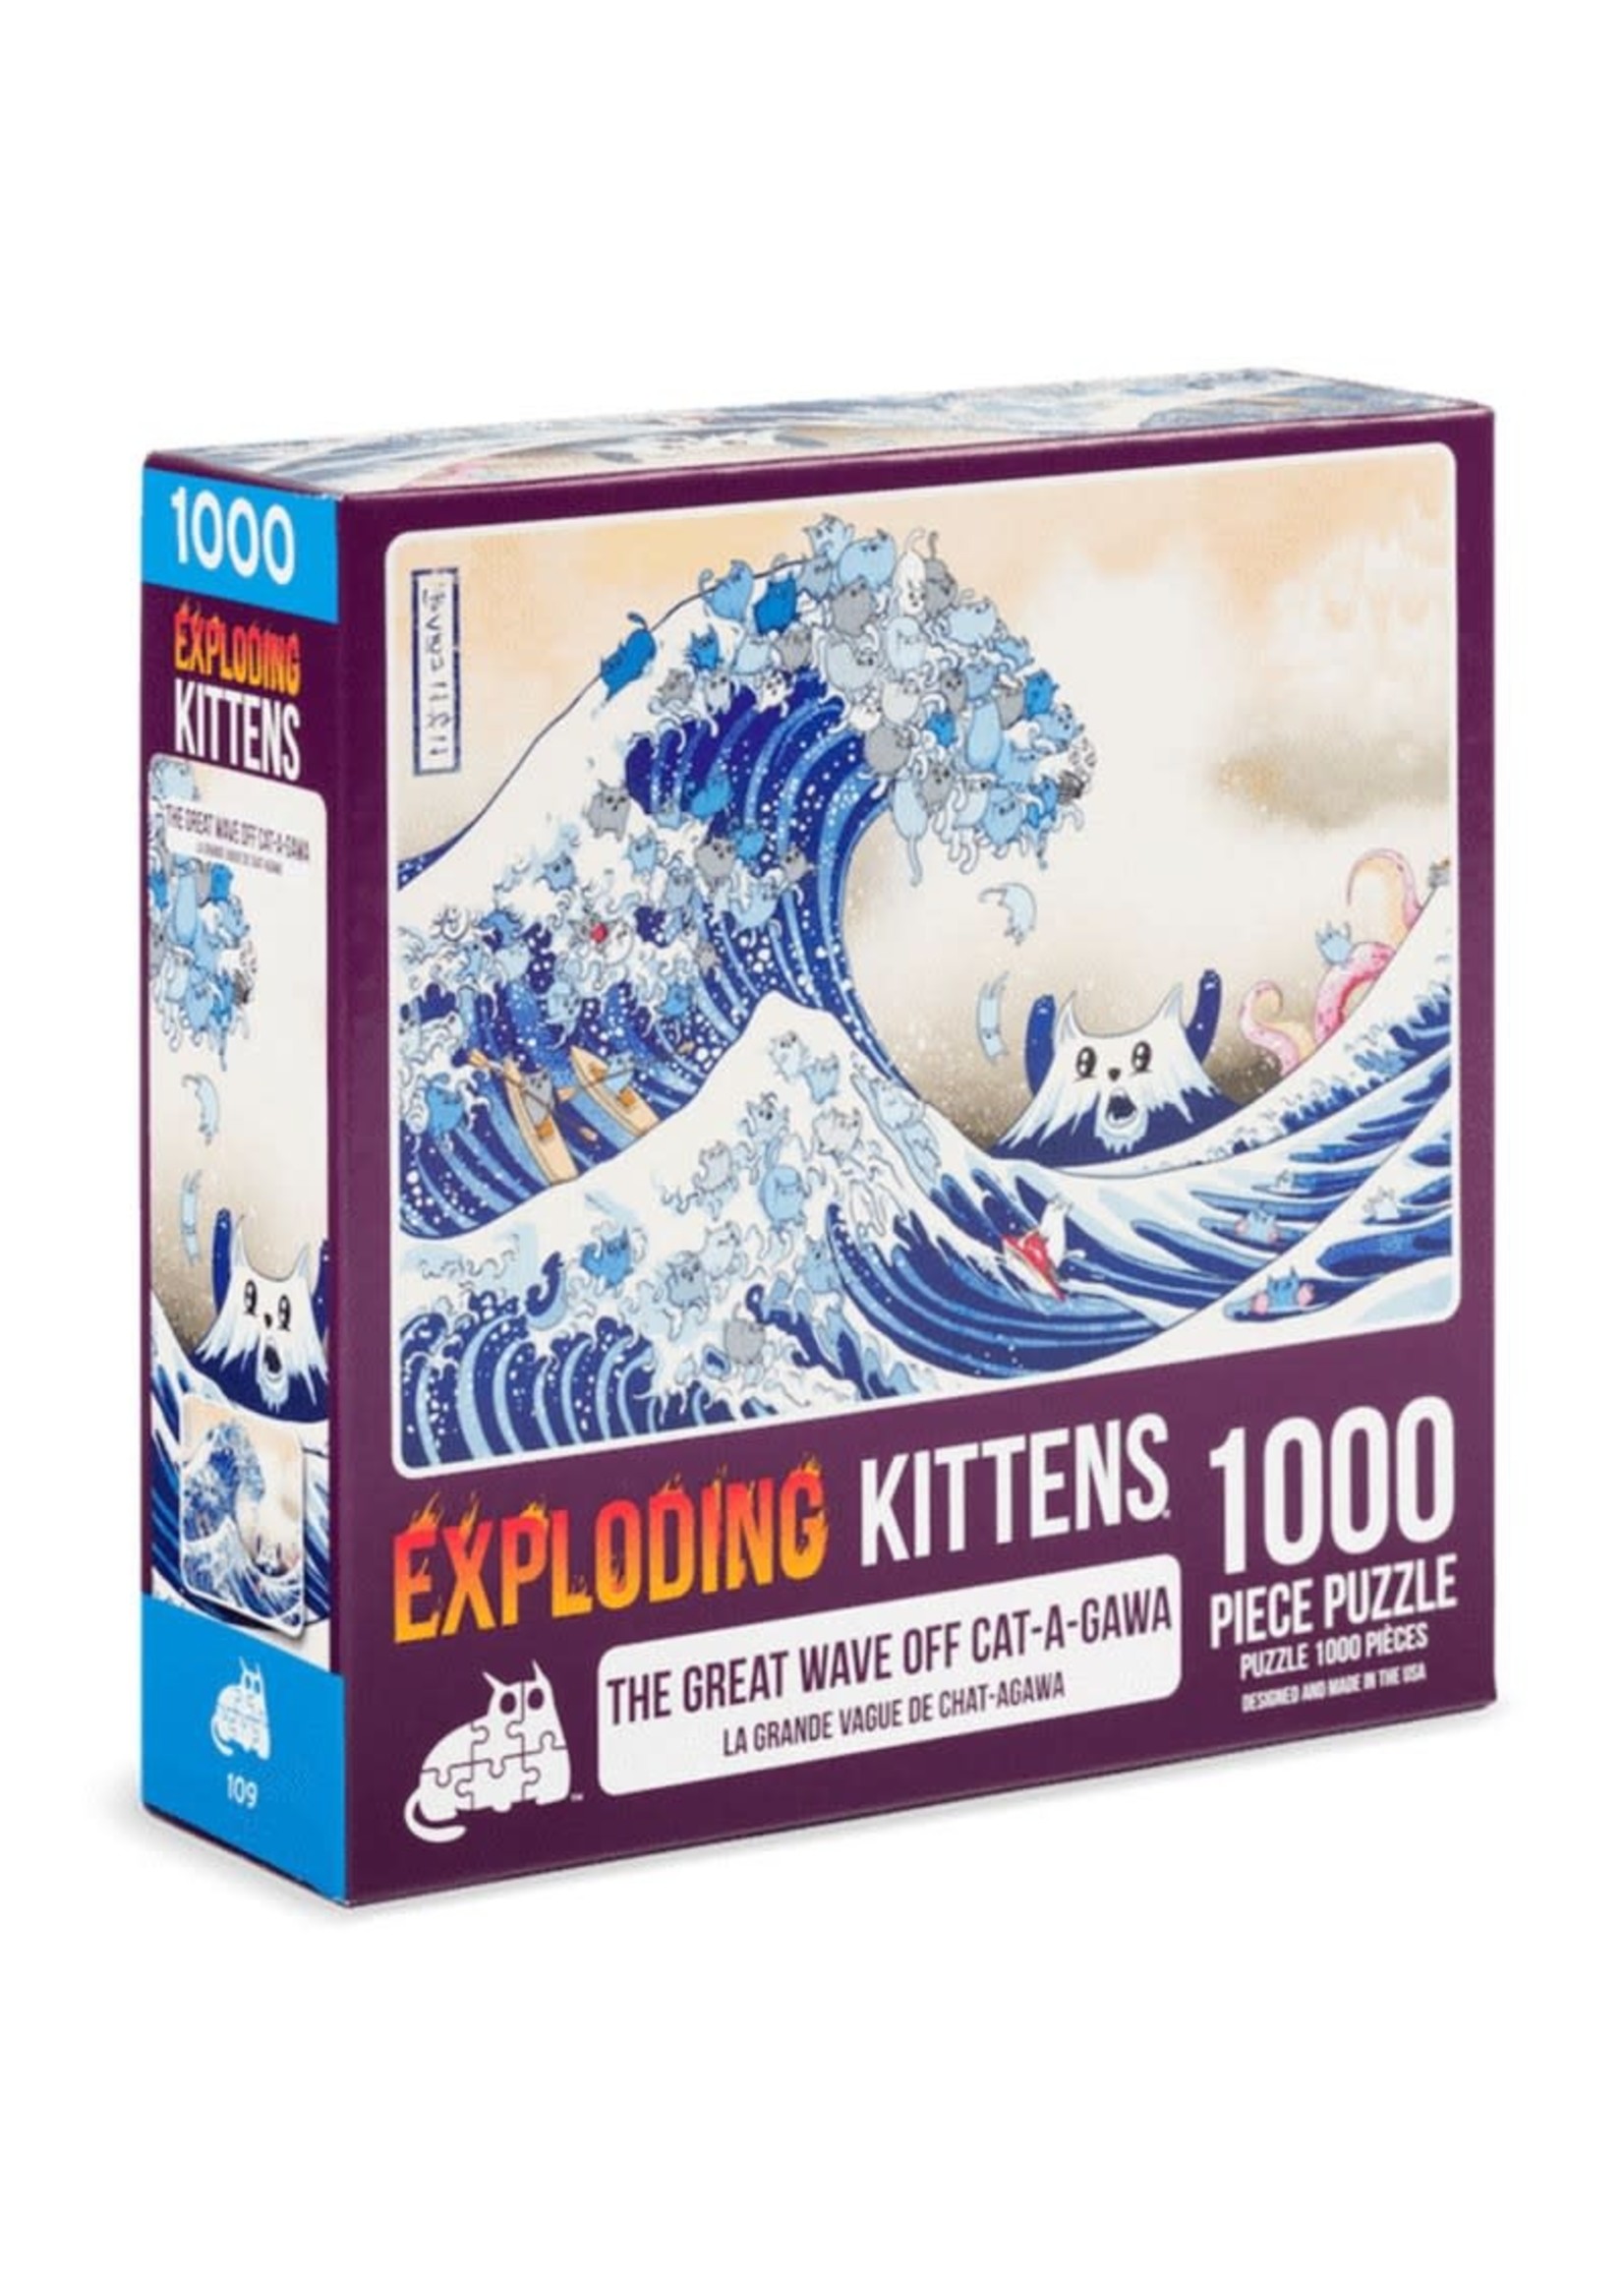 Exploding Kittens 500pc Puzzle: Great Wave of Cat-a-gawa (Exploding Kittens Art)